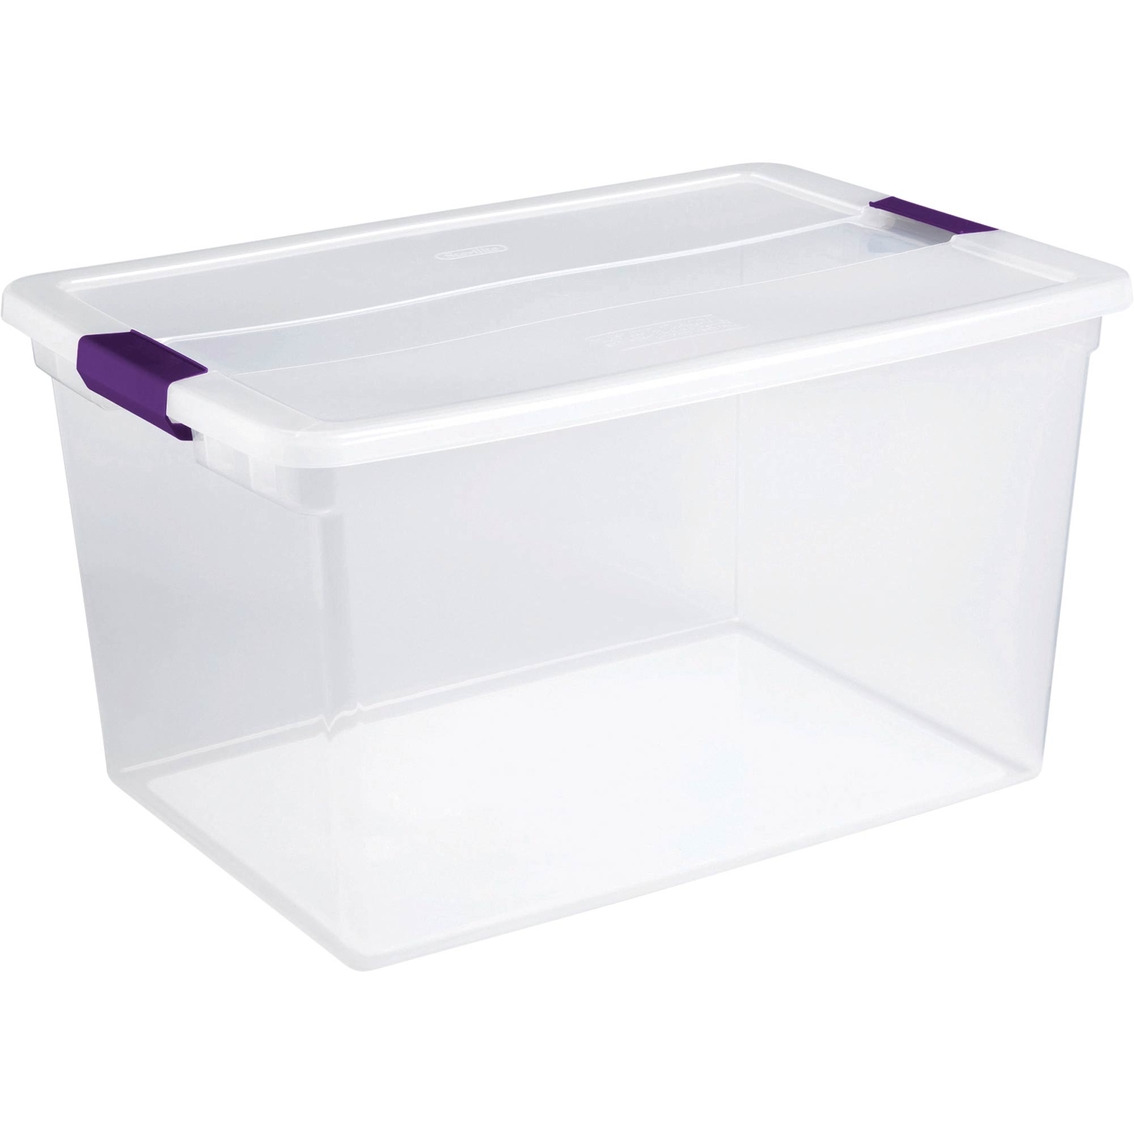 Sterilite ClearView Latch Box - Image 1 of 6